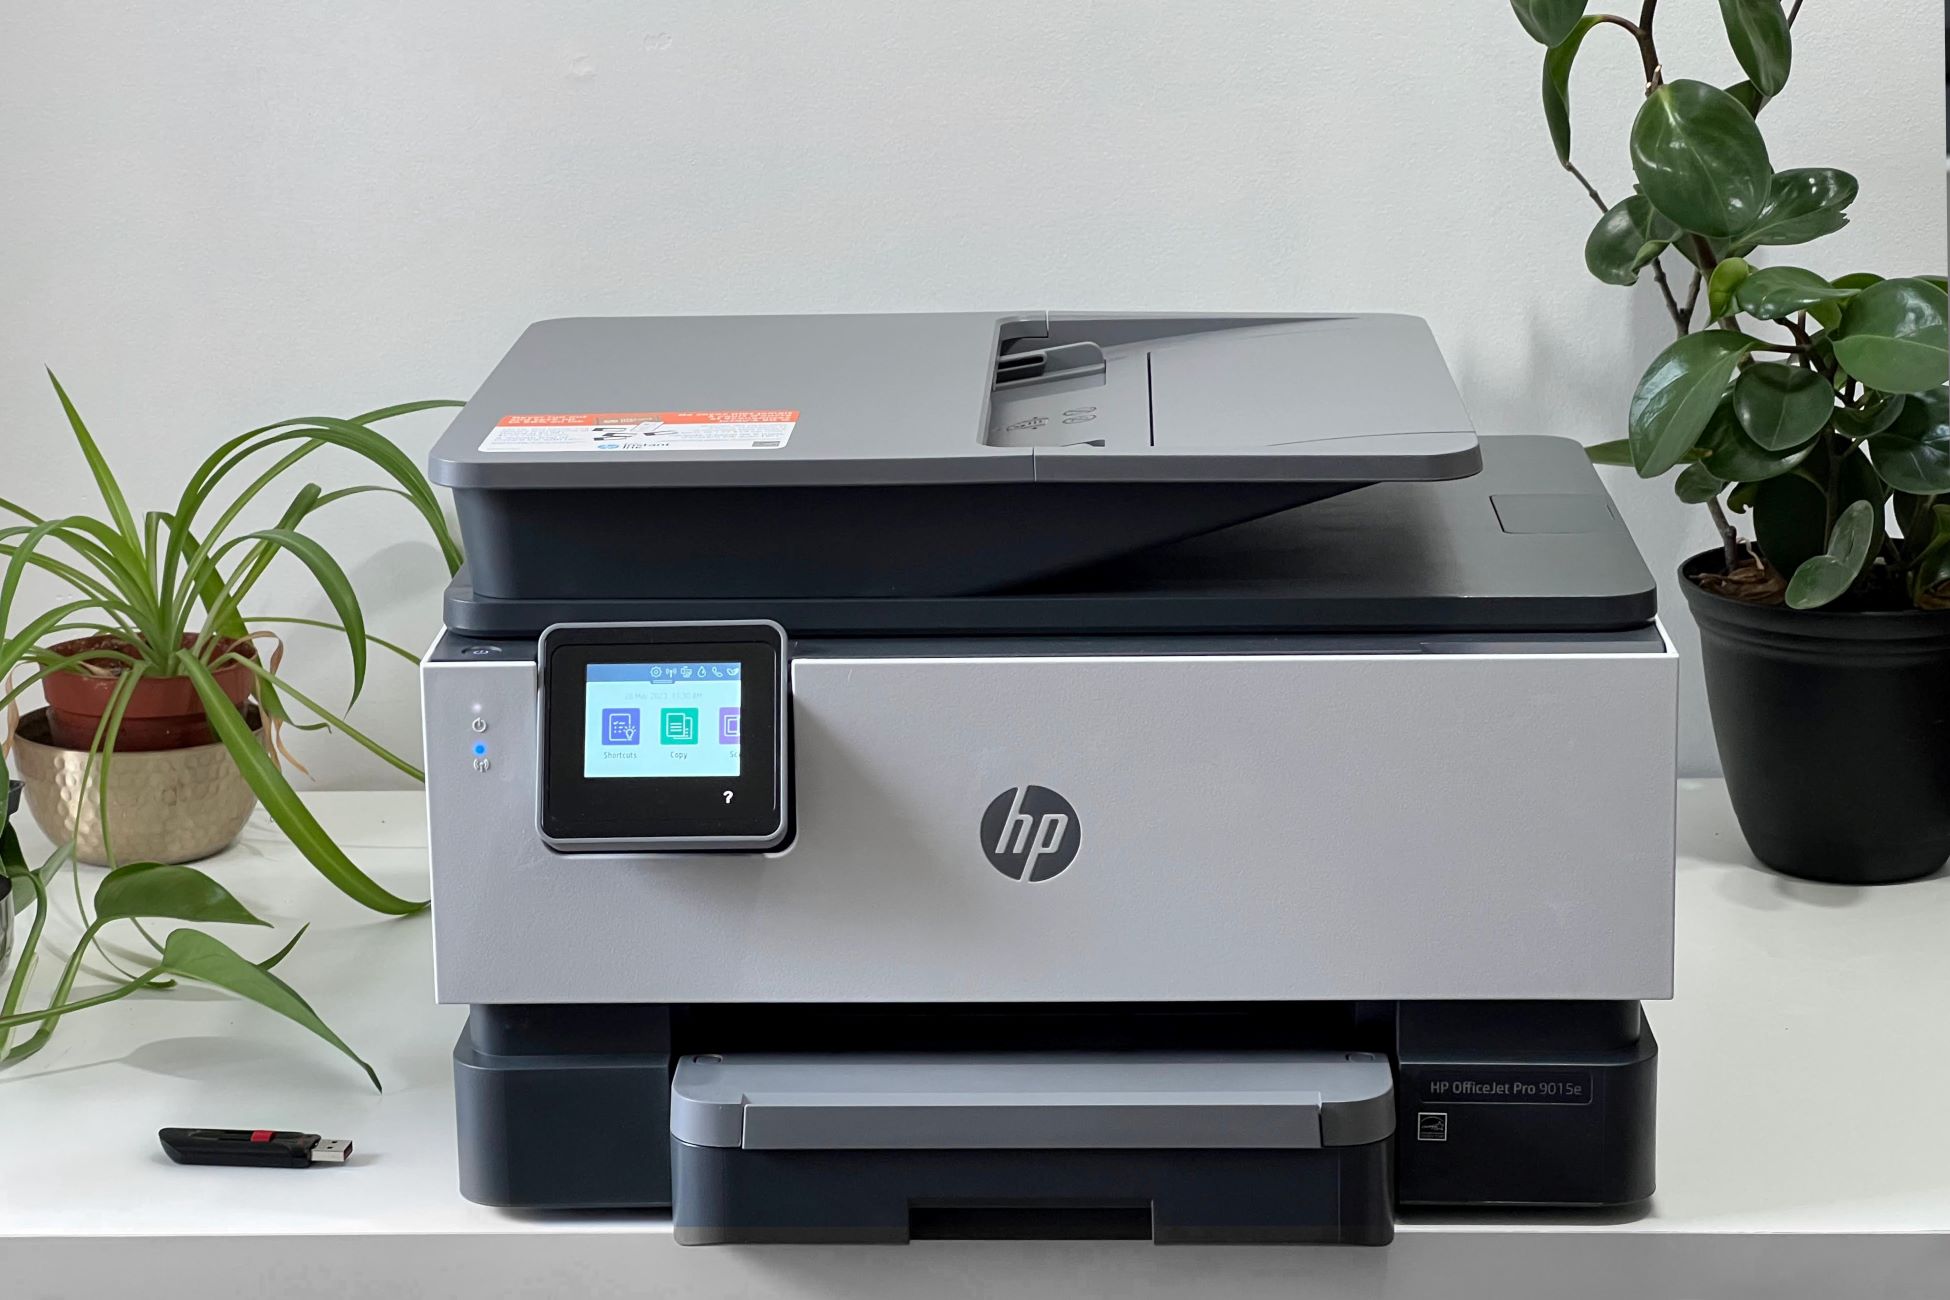 What Is Wi-Fi Direct On A HP Printer